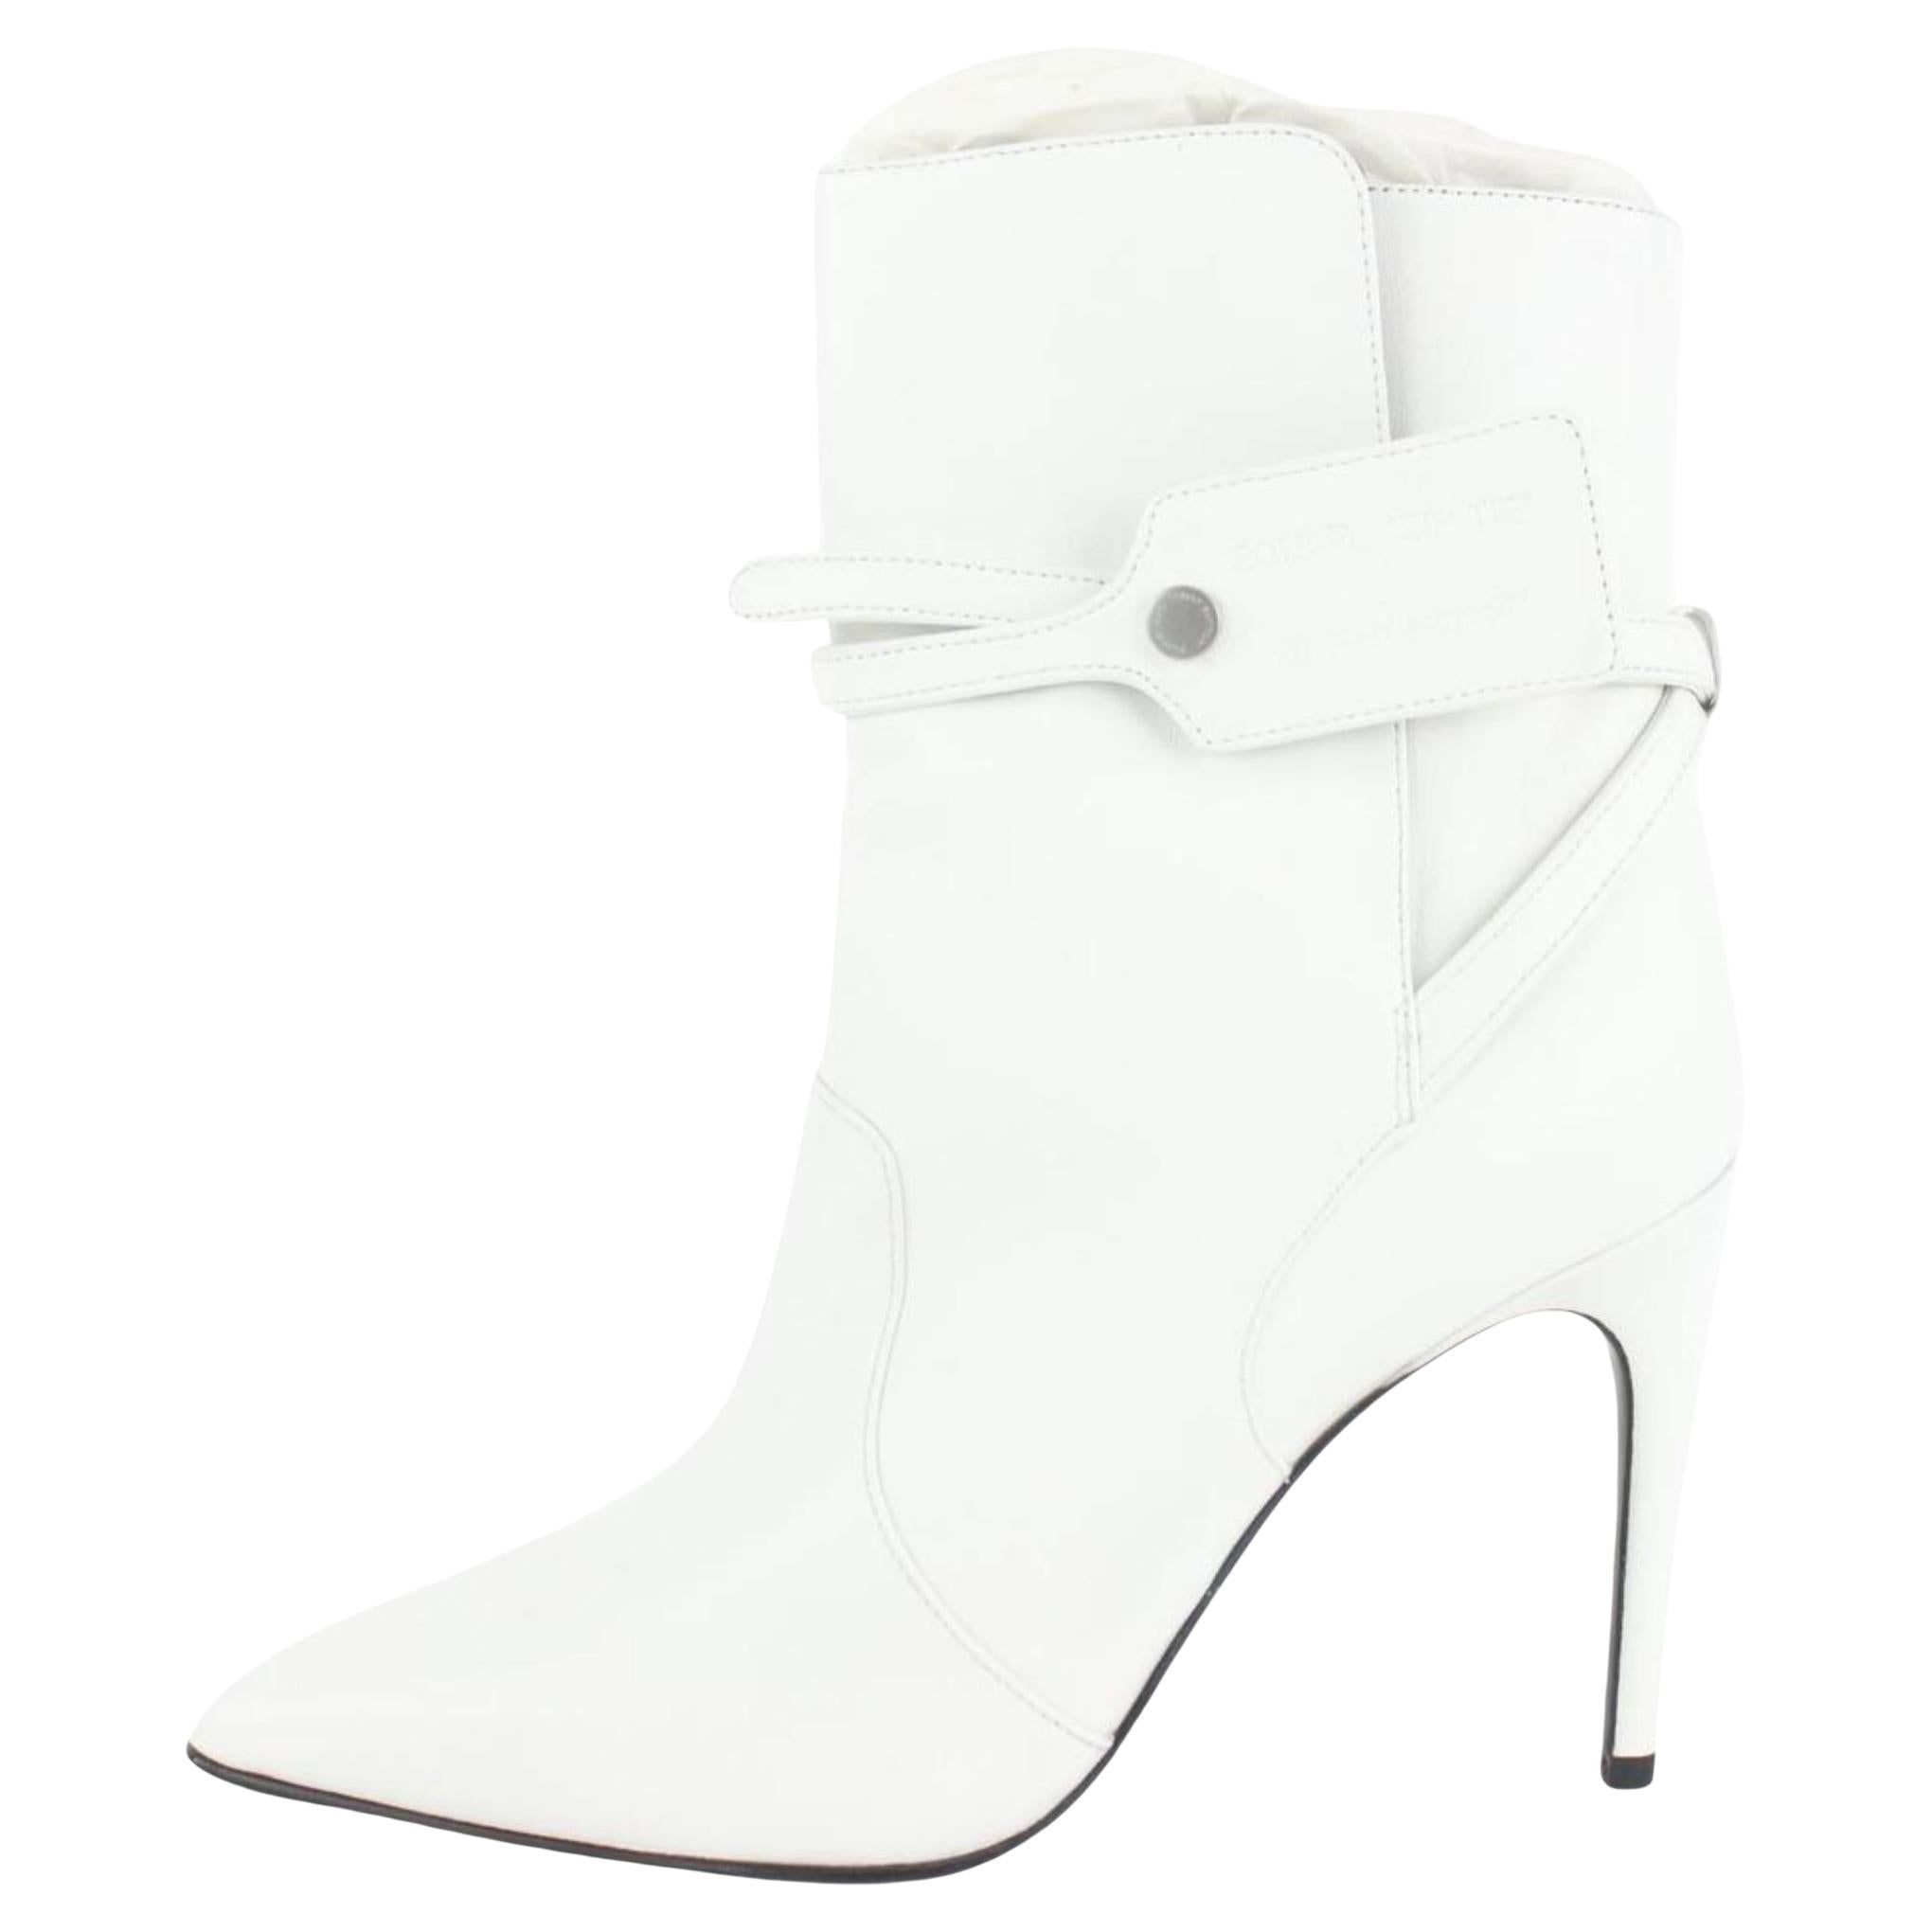 Off-White Women's 37 White Leather Zip Tie Booties 111of10 For Sale